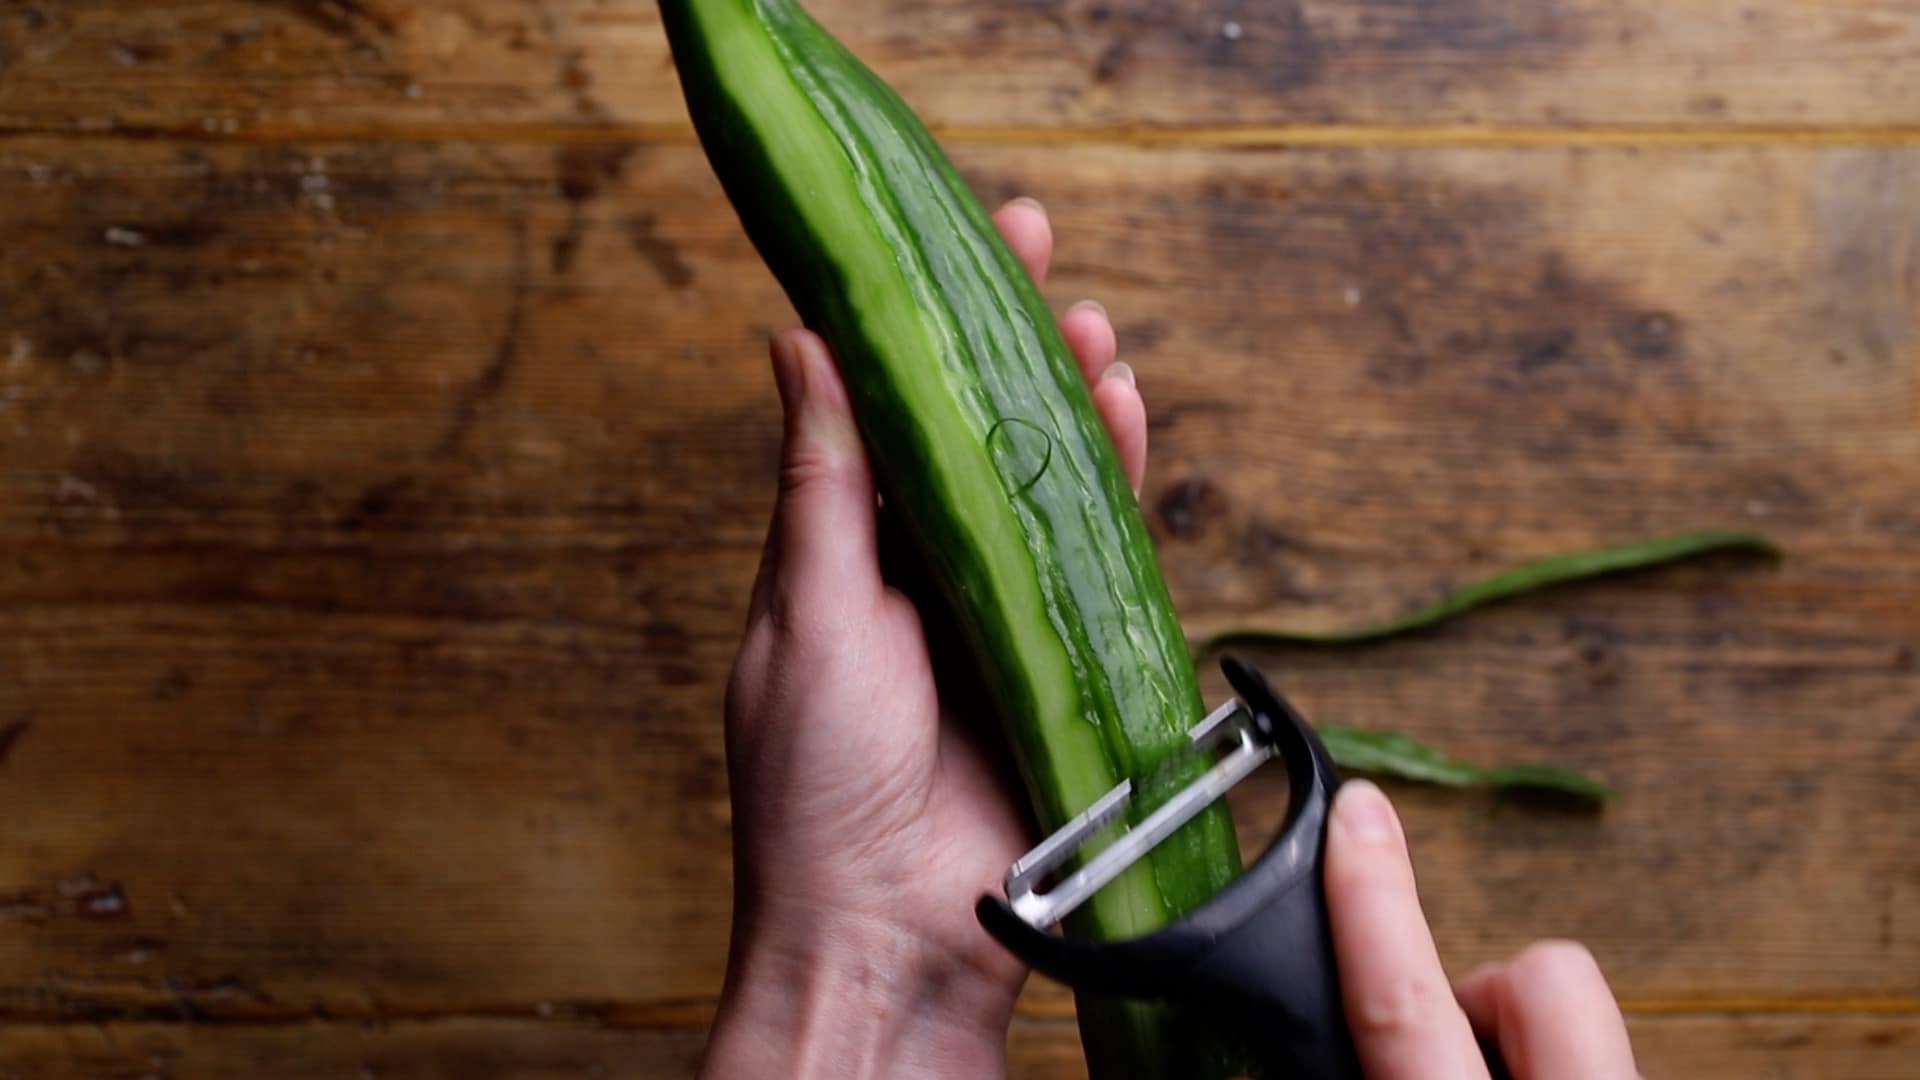 roughly peel the cucumber